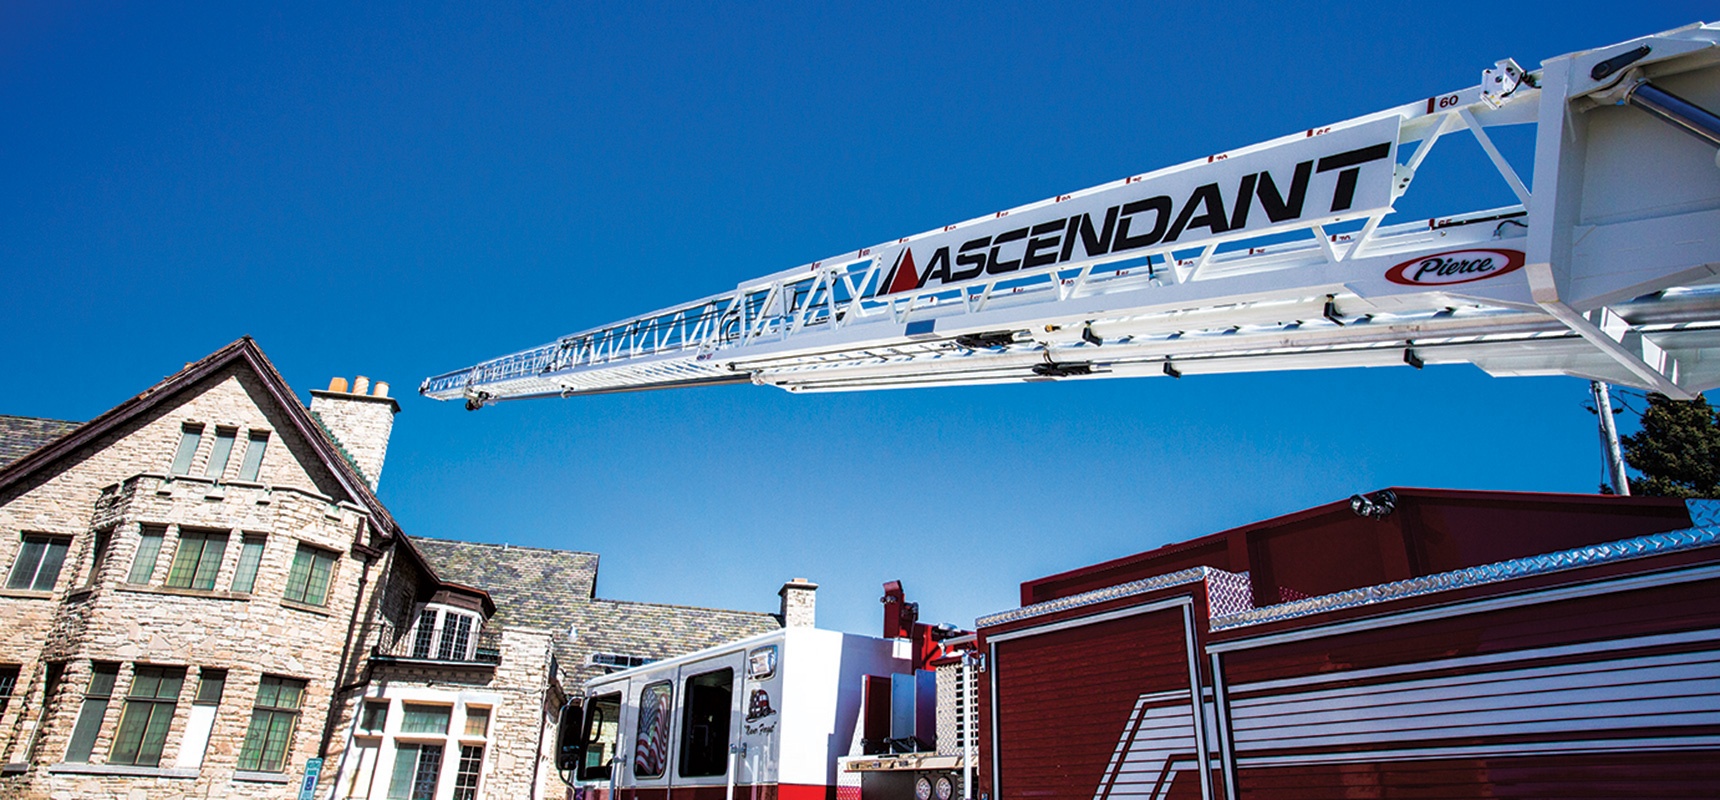 Pierce-Announces-Several-New-Patent-Awards-for-its-Ascendant-Class-of-Aerial-Apparatus_Header.jpg